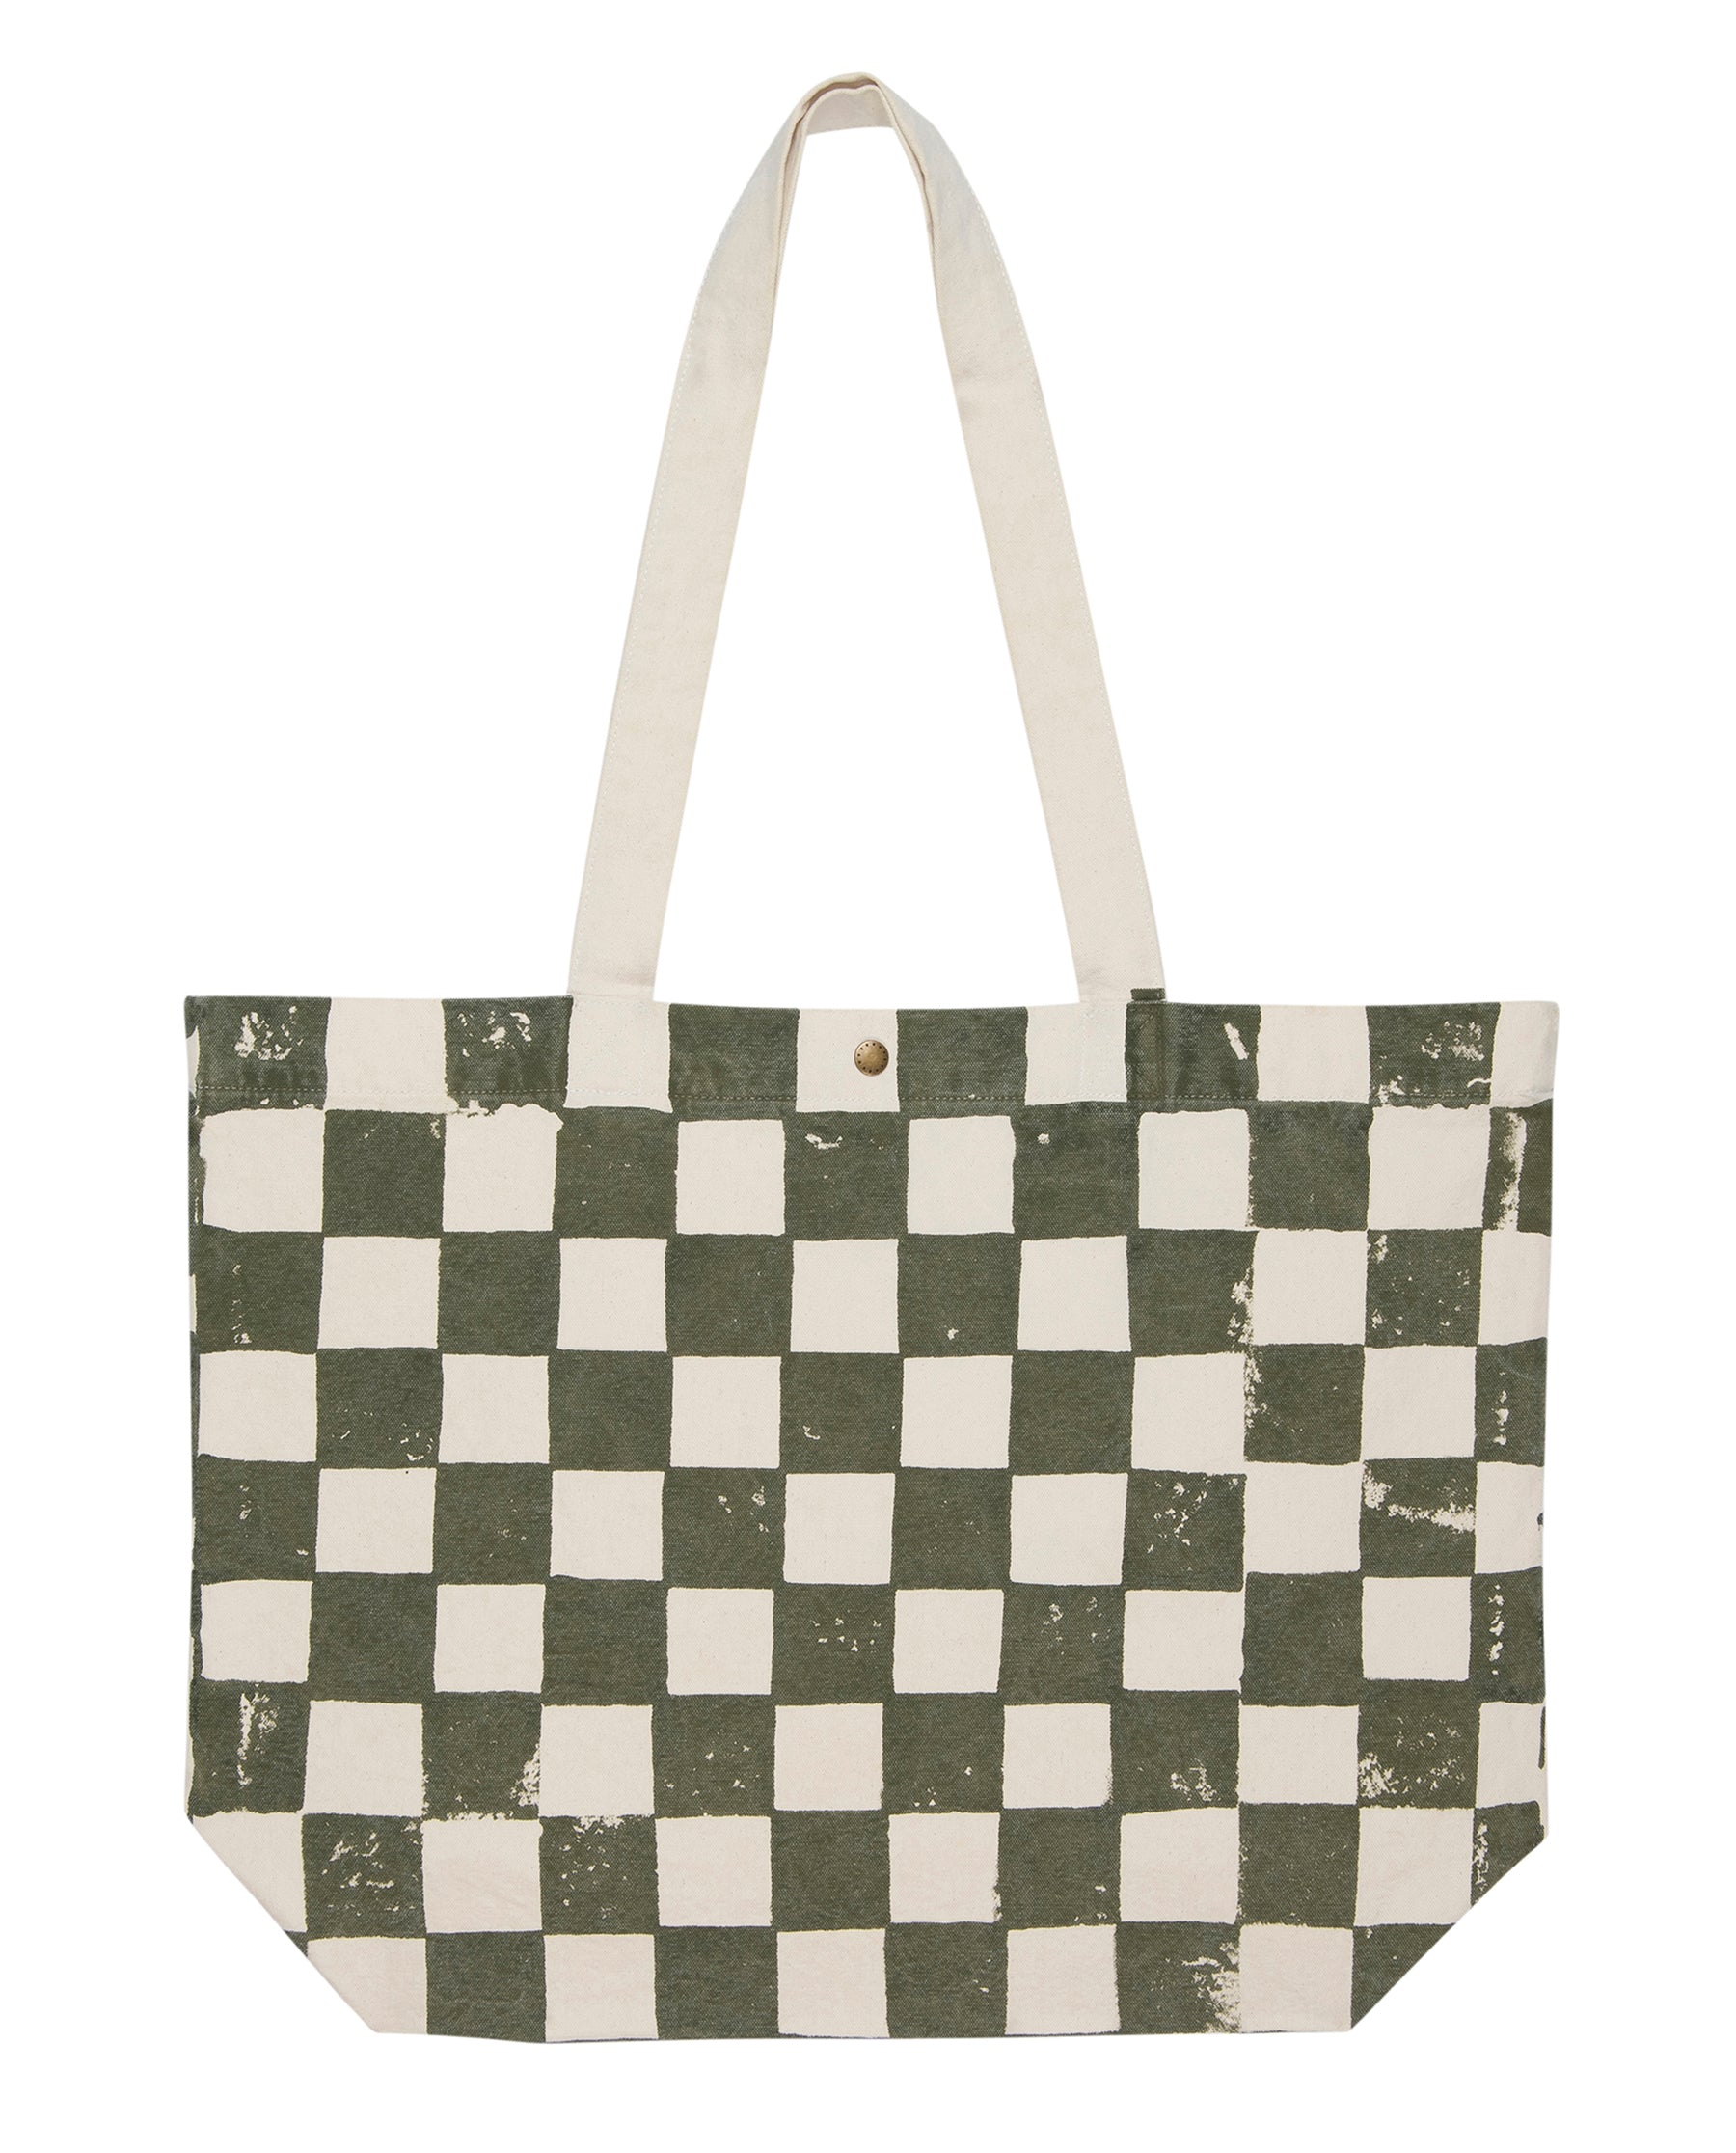 The Beach Tote. -- Cream with Army Check Stamp TOTES THE GREAT. SP23 SWIM